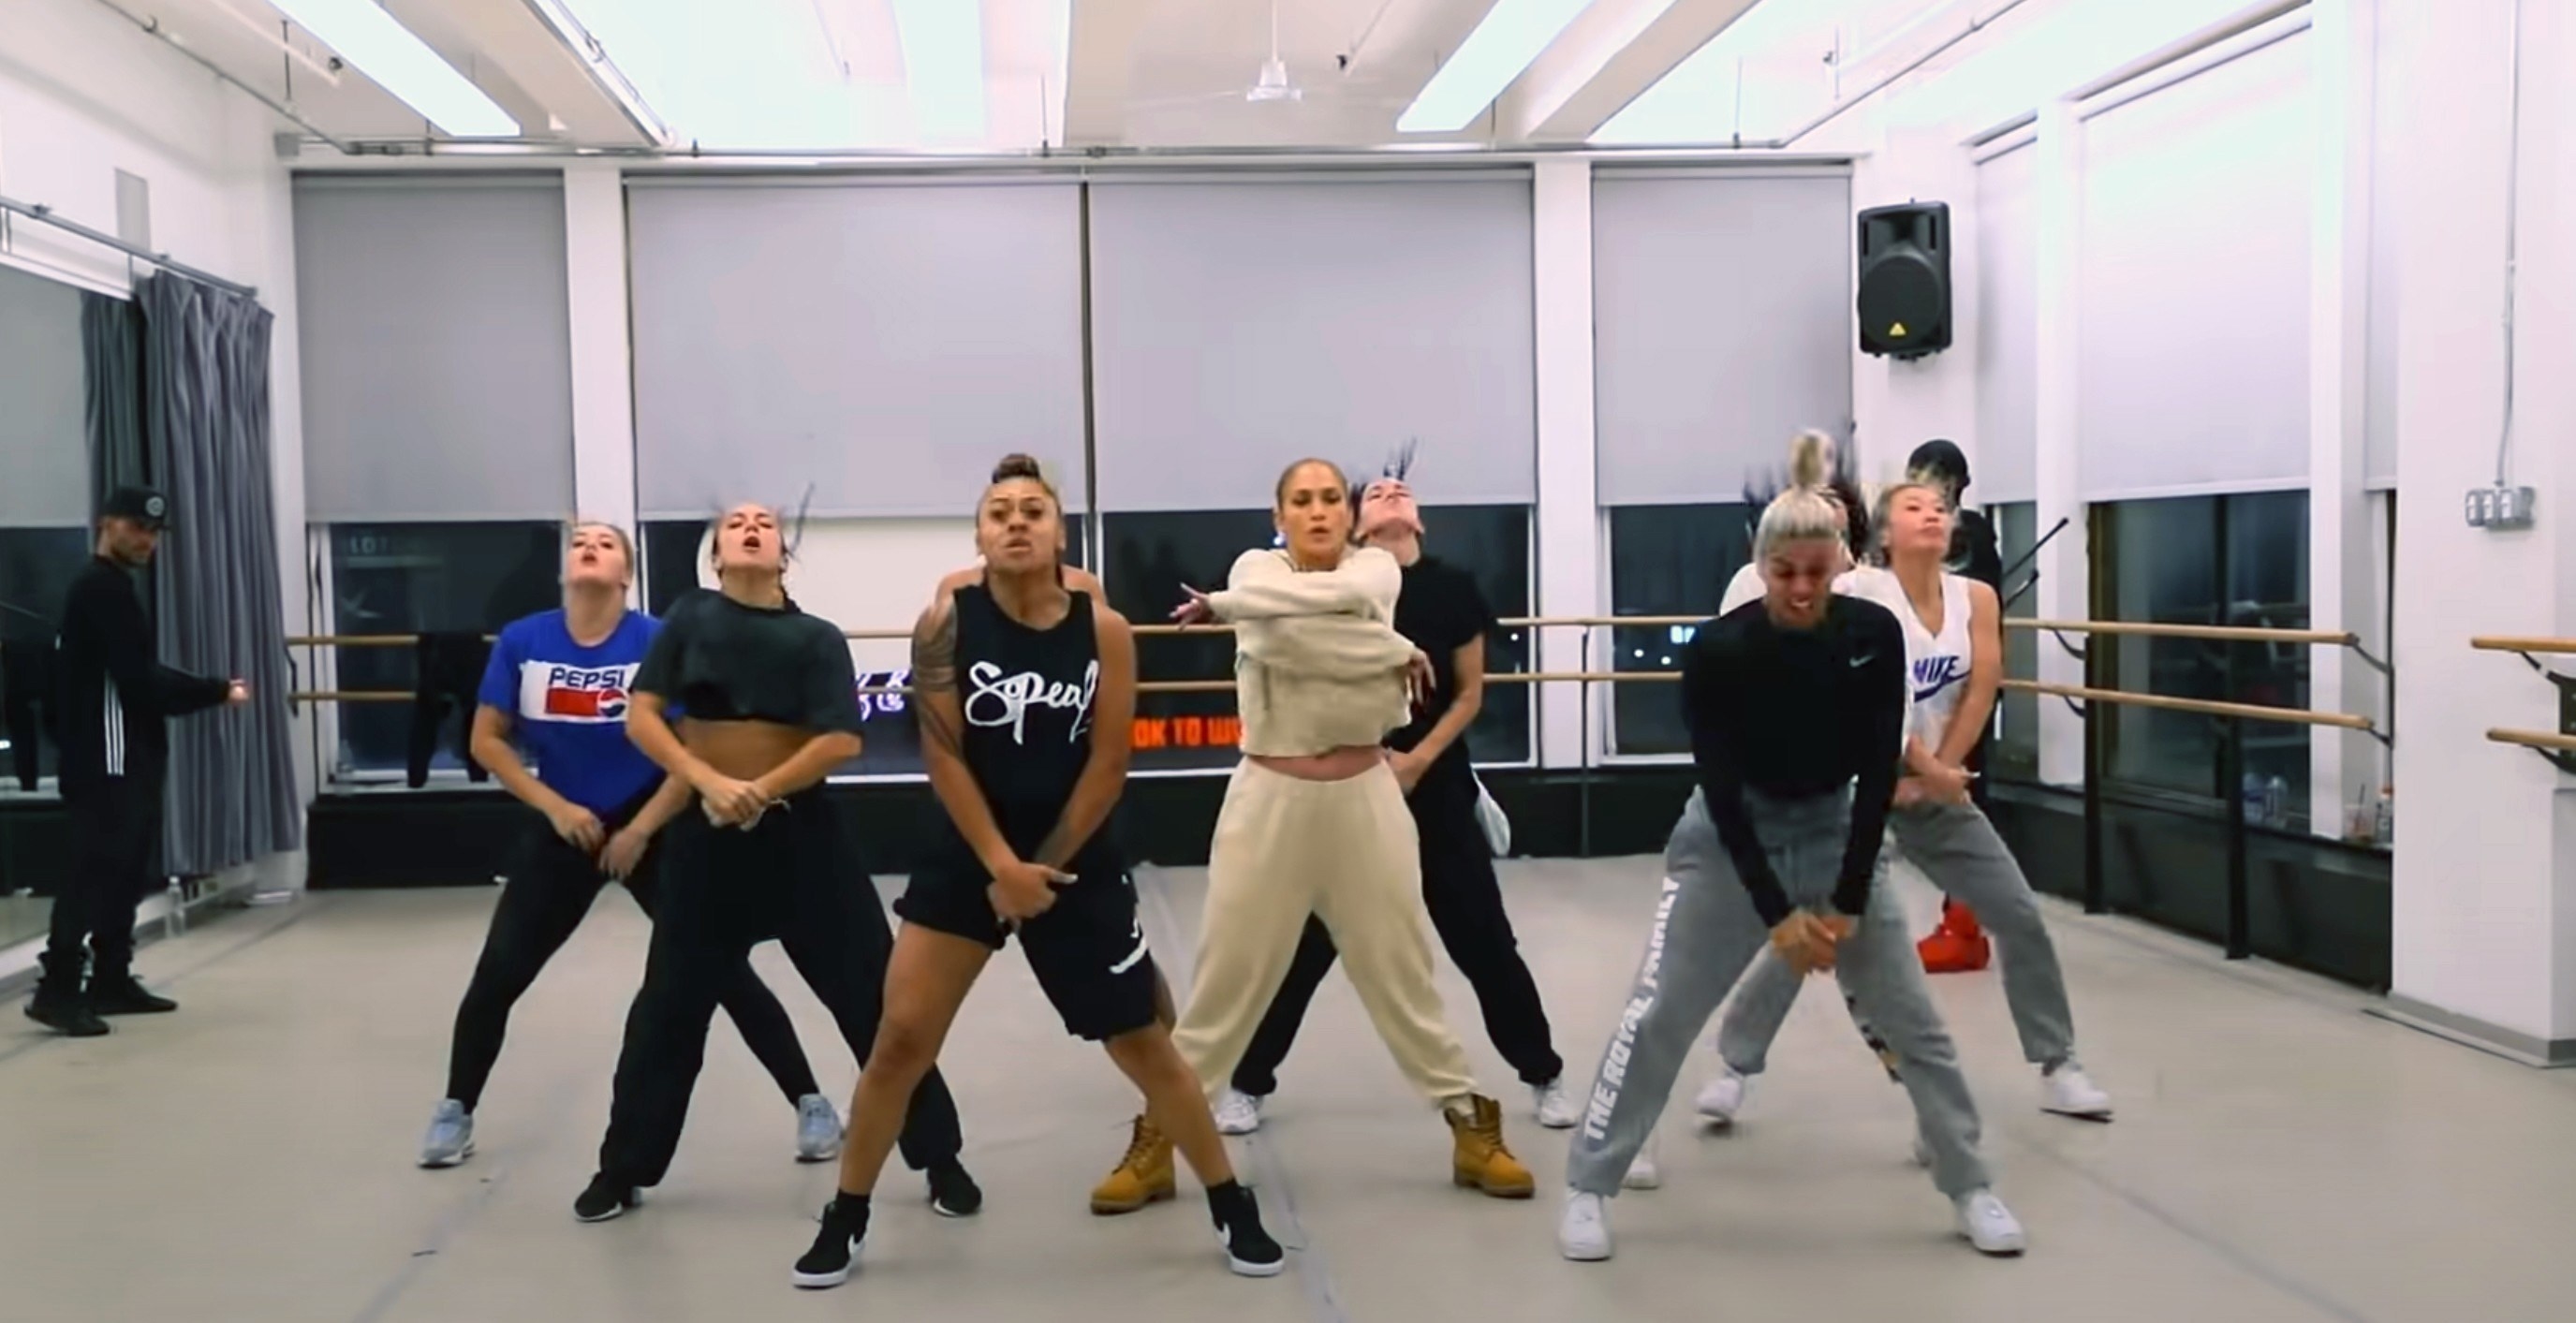 Jennifer Lopez rehearses with her backup dancers